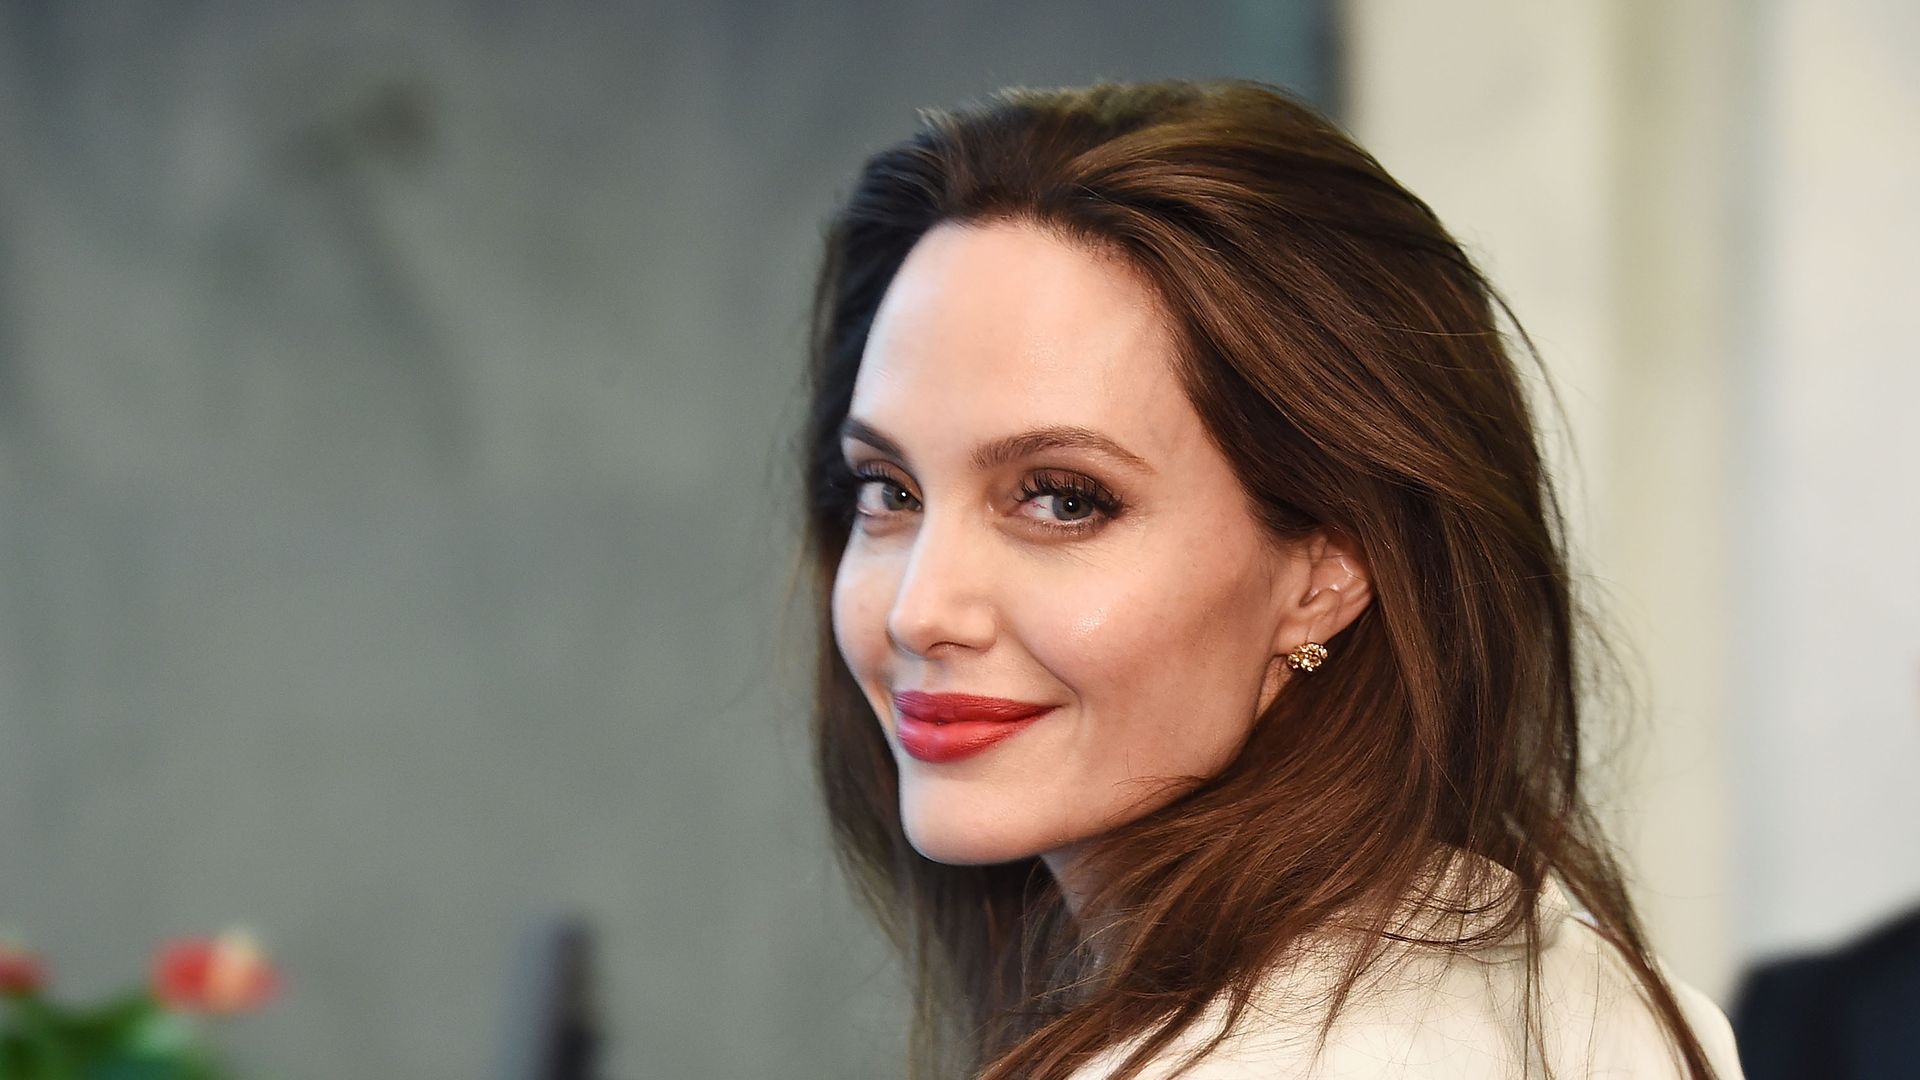 Actress and Special Envoy to the United Nations High Commissioner for Refugees Angelina Jolie visits The United Nations on September 14, 2017 in New York City